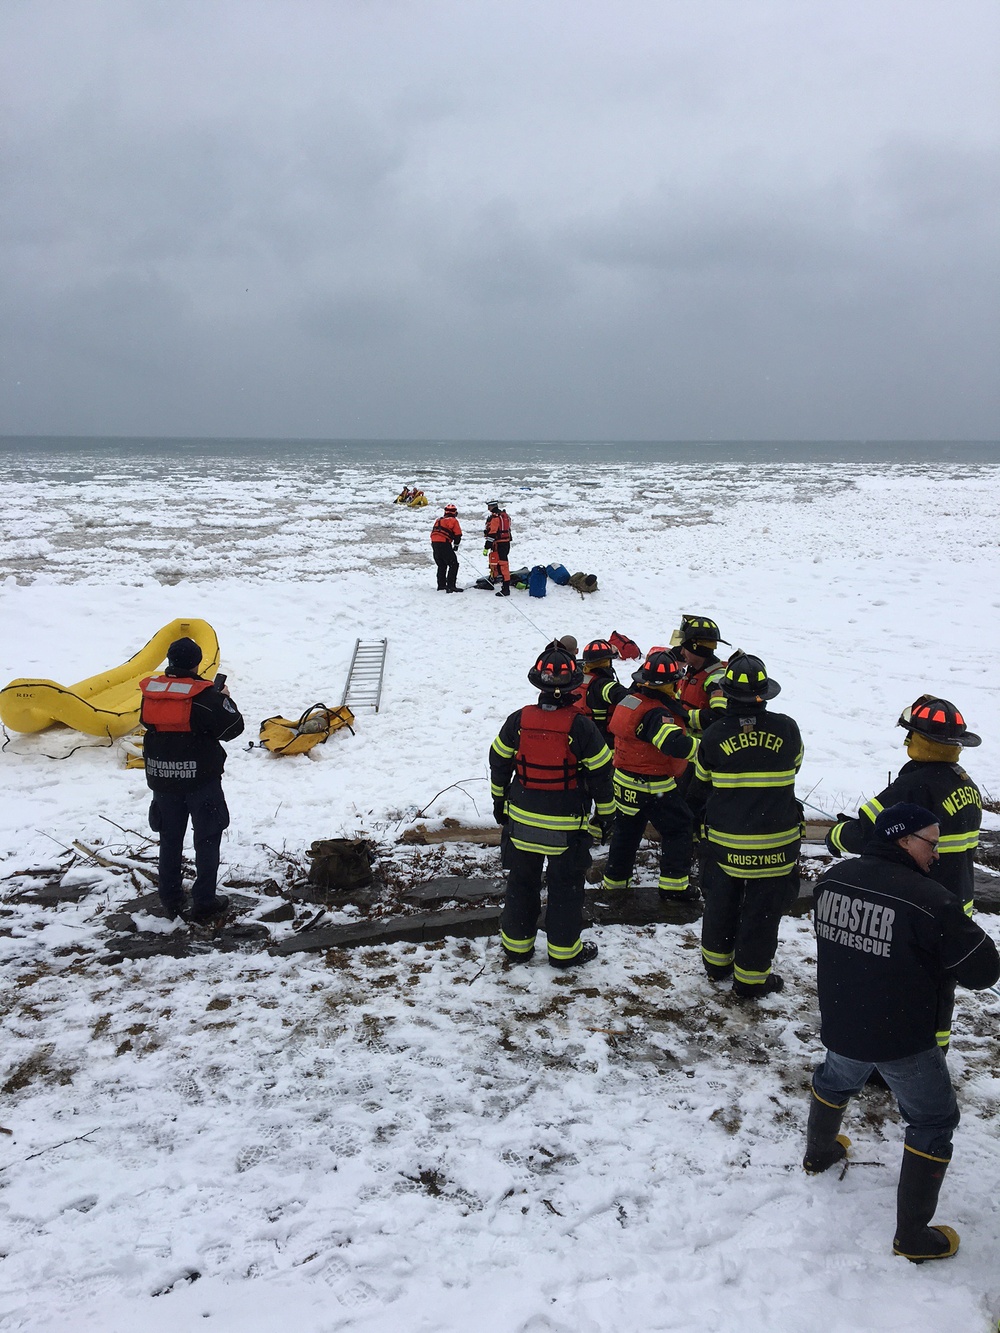 Station Rochester rescues 2 from Lake Ontario ice